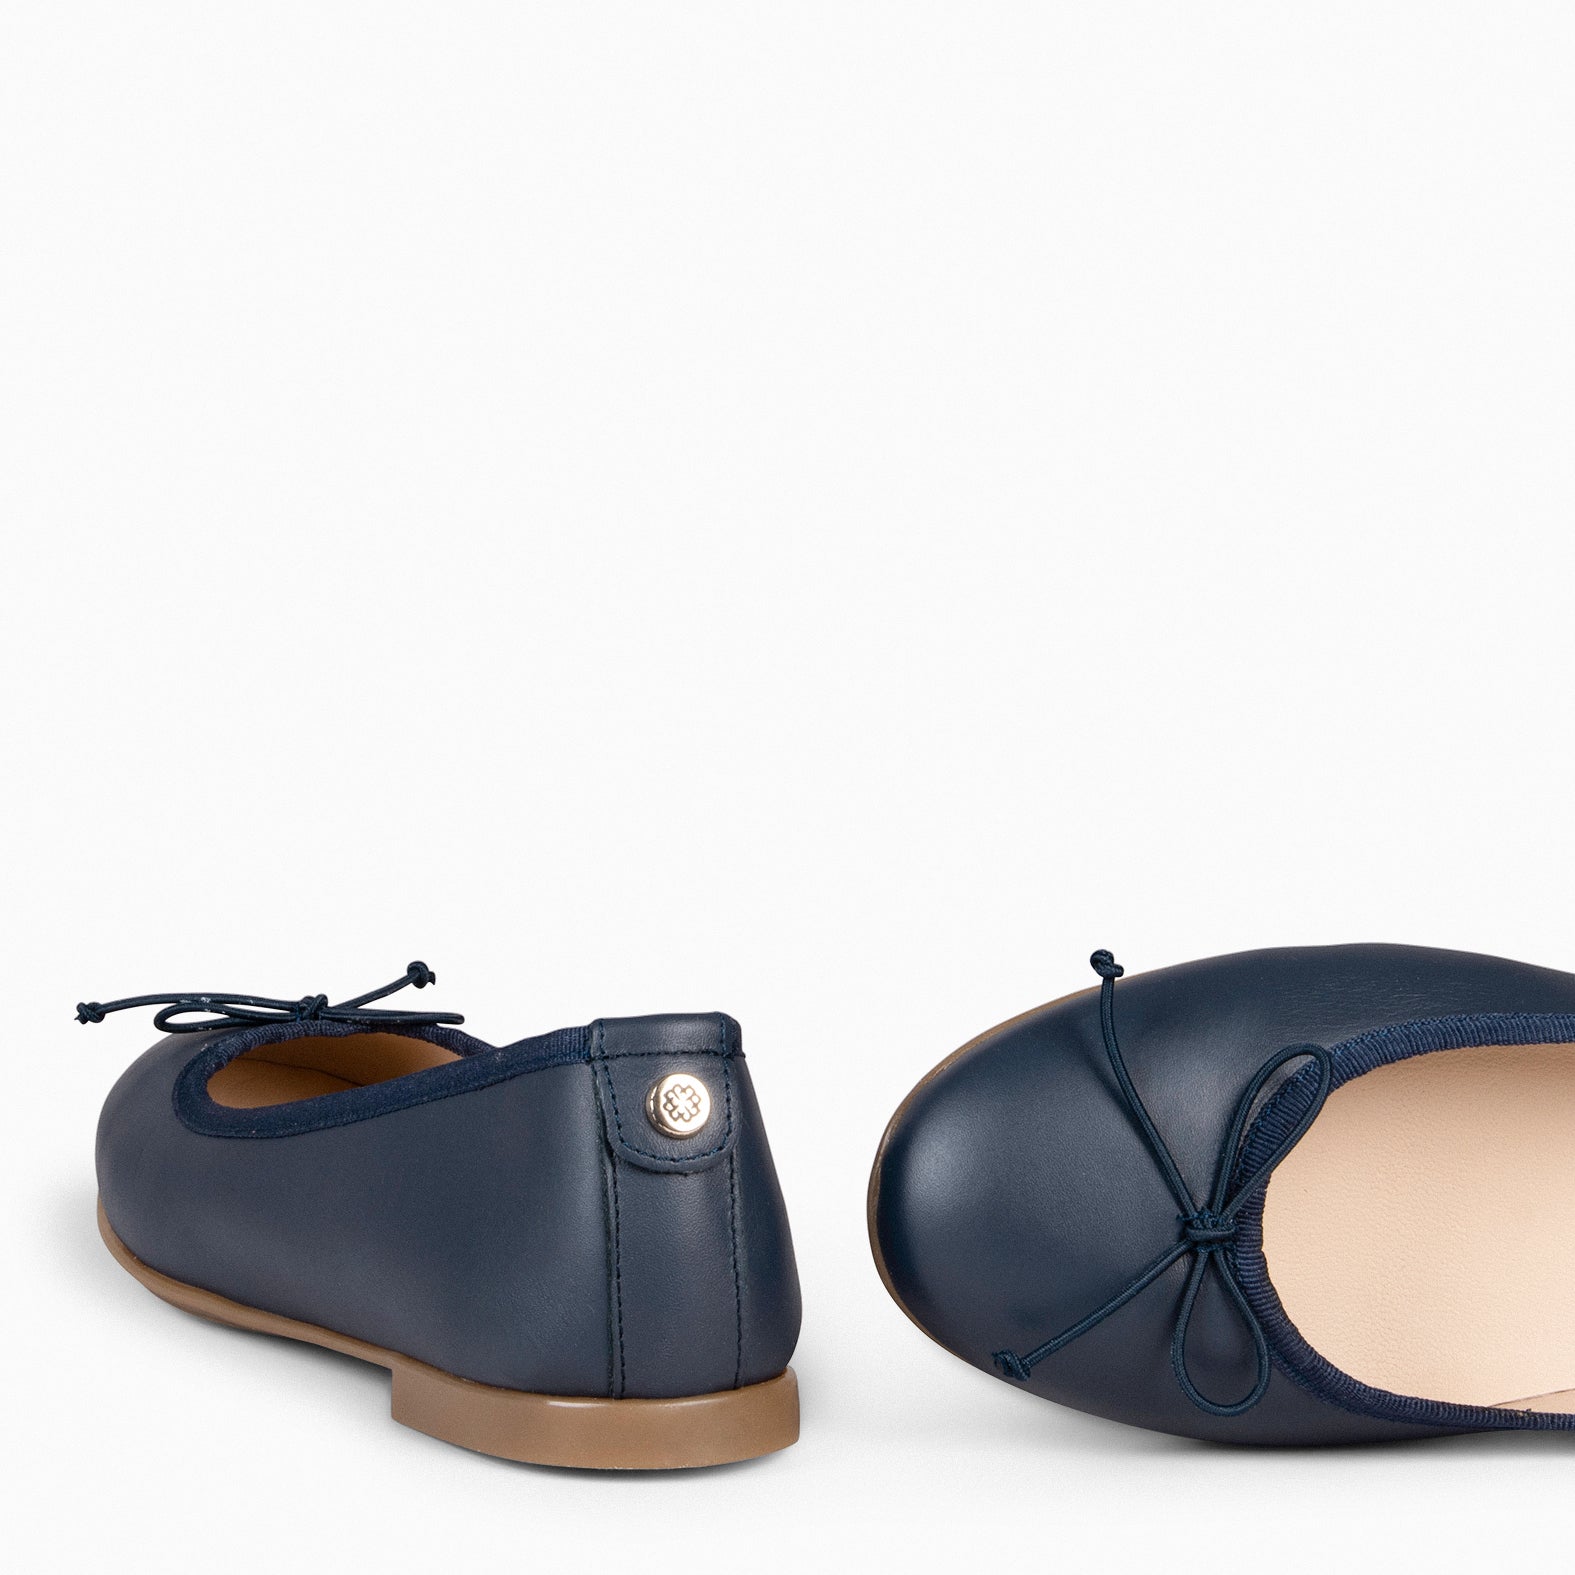 HELENE – NAVY Ballerinas with lace 